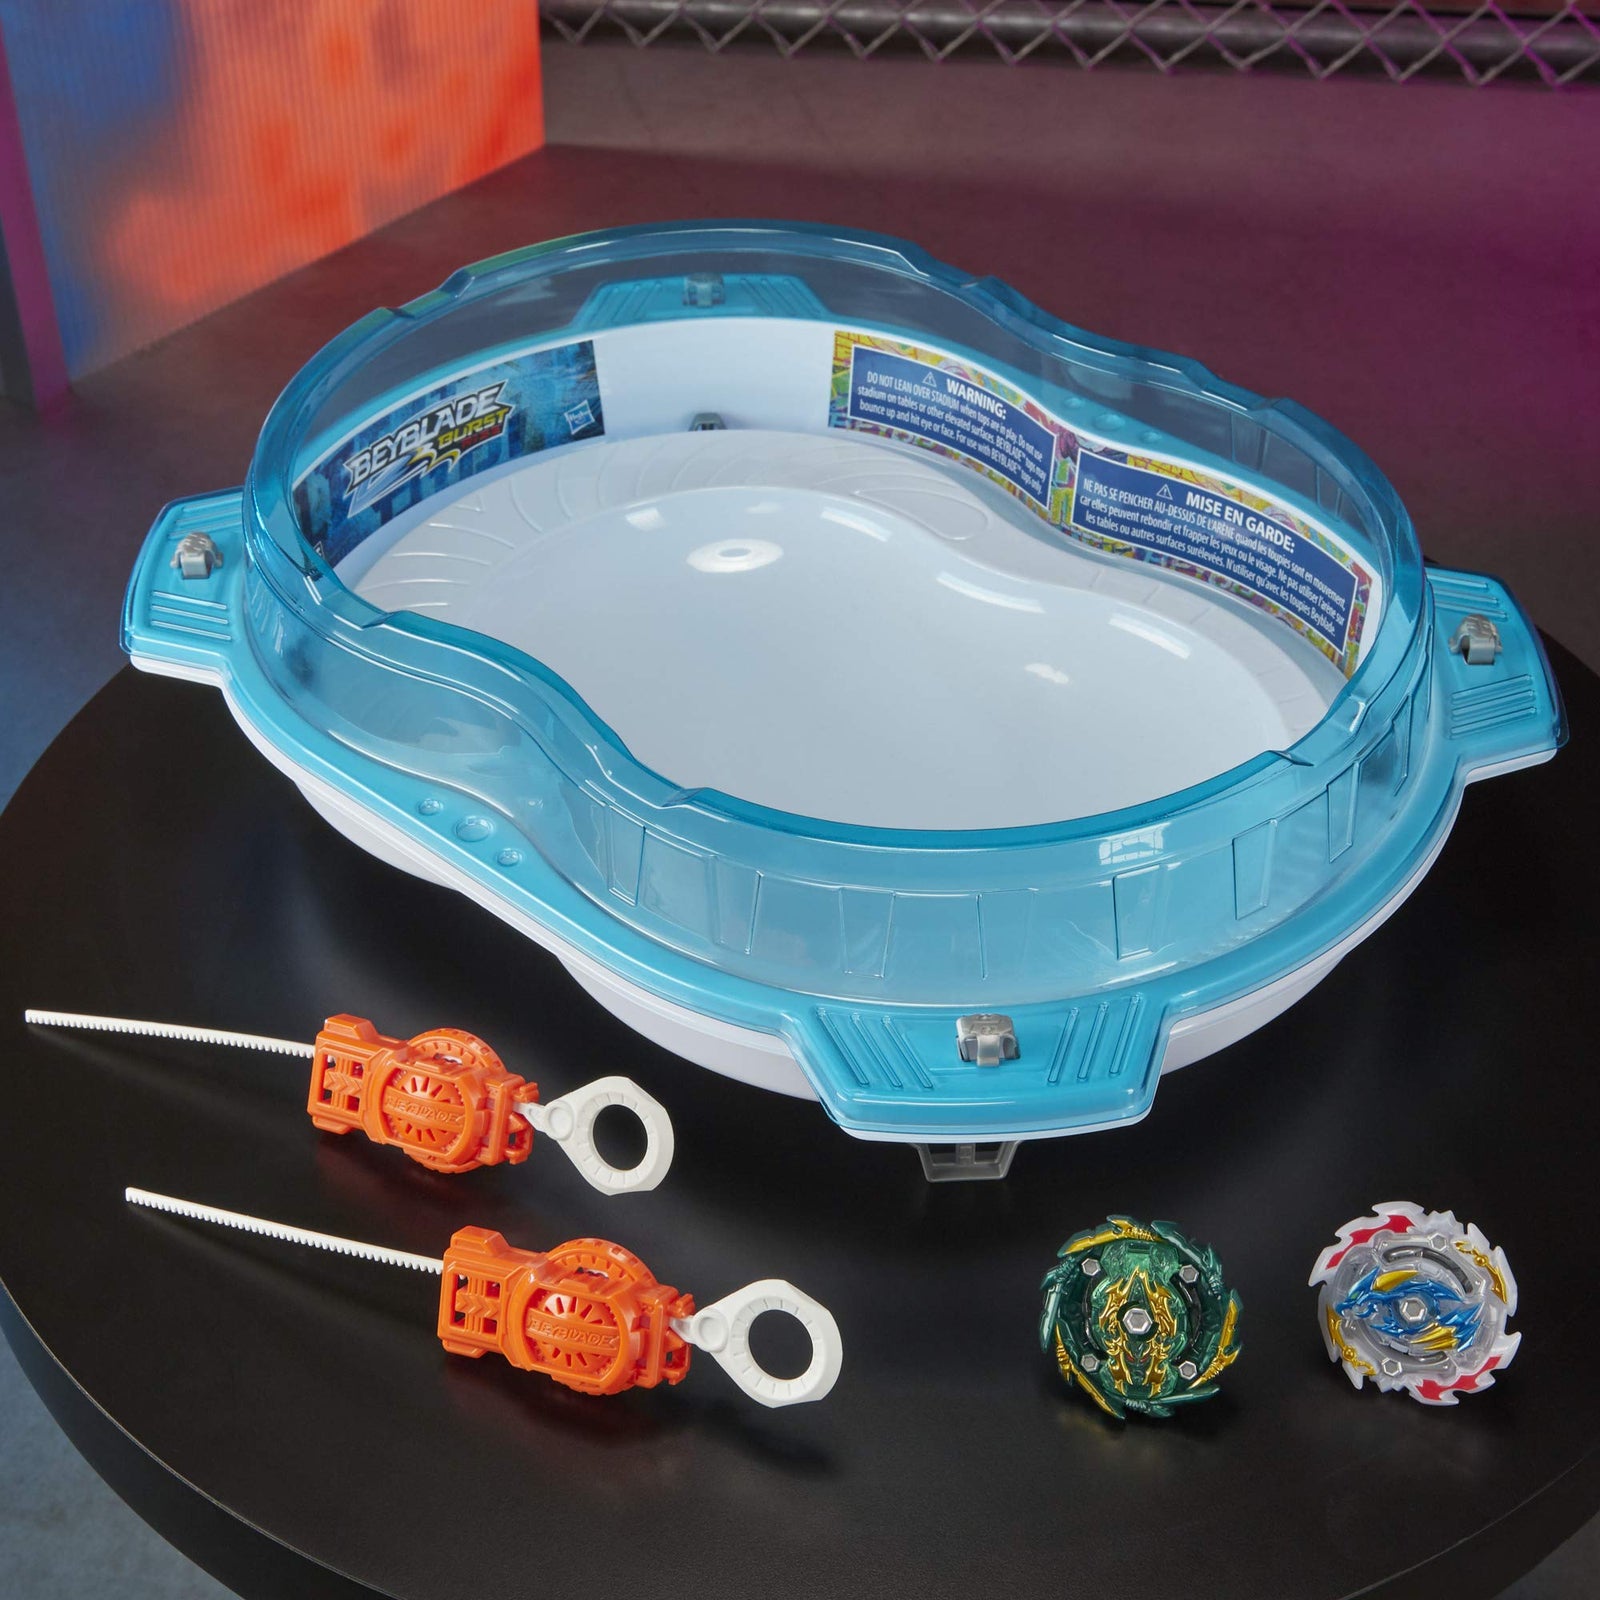 Beyblade Burst Rise Hypersphere Vertical Drop Battle Set -- Complete Set with Beystadium, 2 Battling Top Toys and 2 Launchers, Ages 8 and Up (Amazon Exclusive)